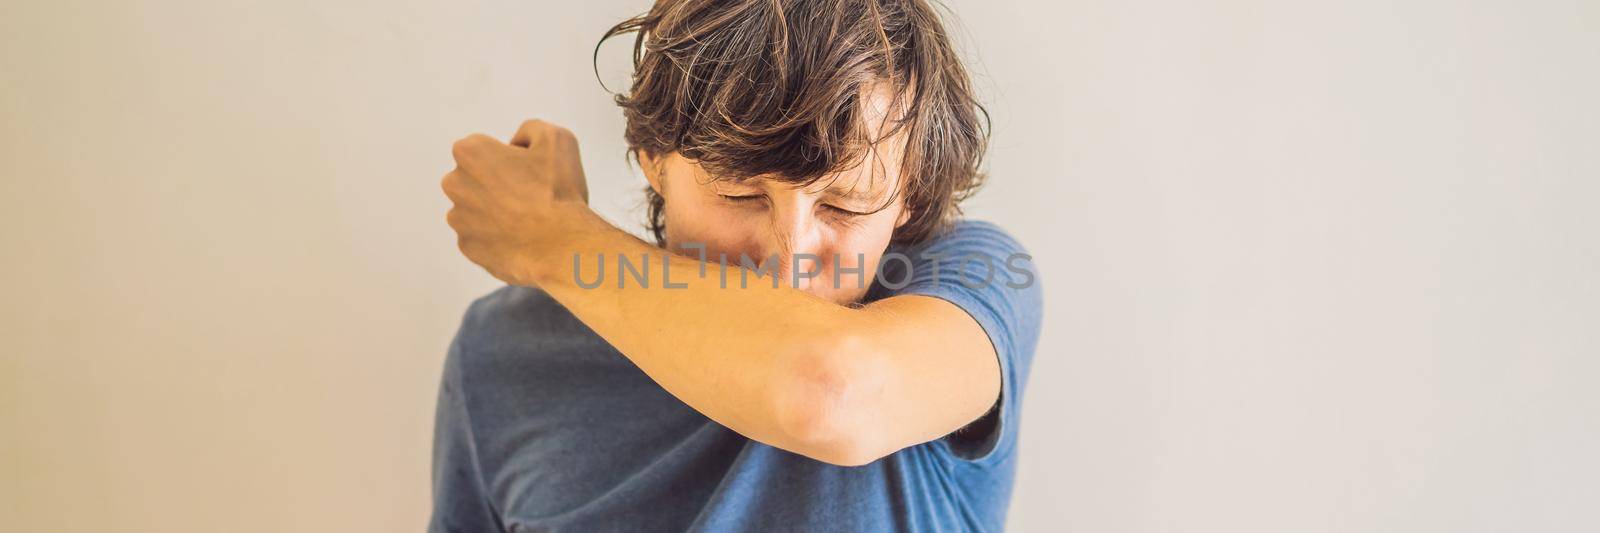 Comparison between wrong and right way to sneeze to prevent virus infection. Caucasian man sneezing, coughing into her arm or elbow to prevent spread Covid-19,Coronavirus. BANNER, LONG FORMAT